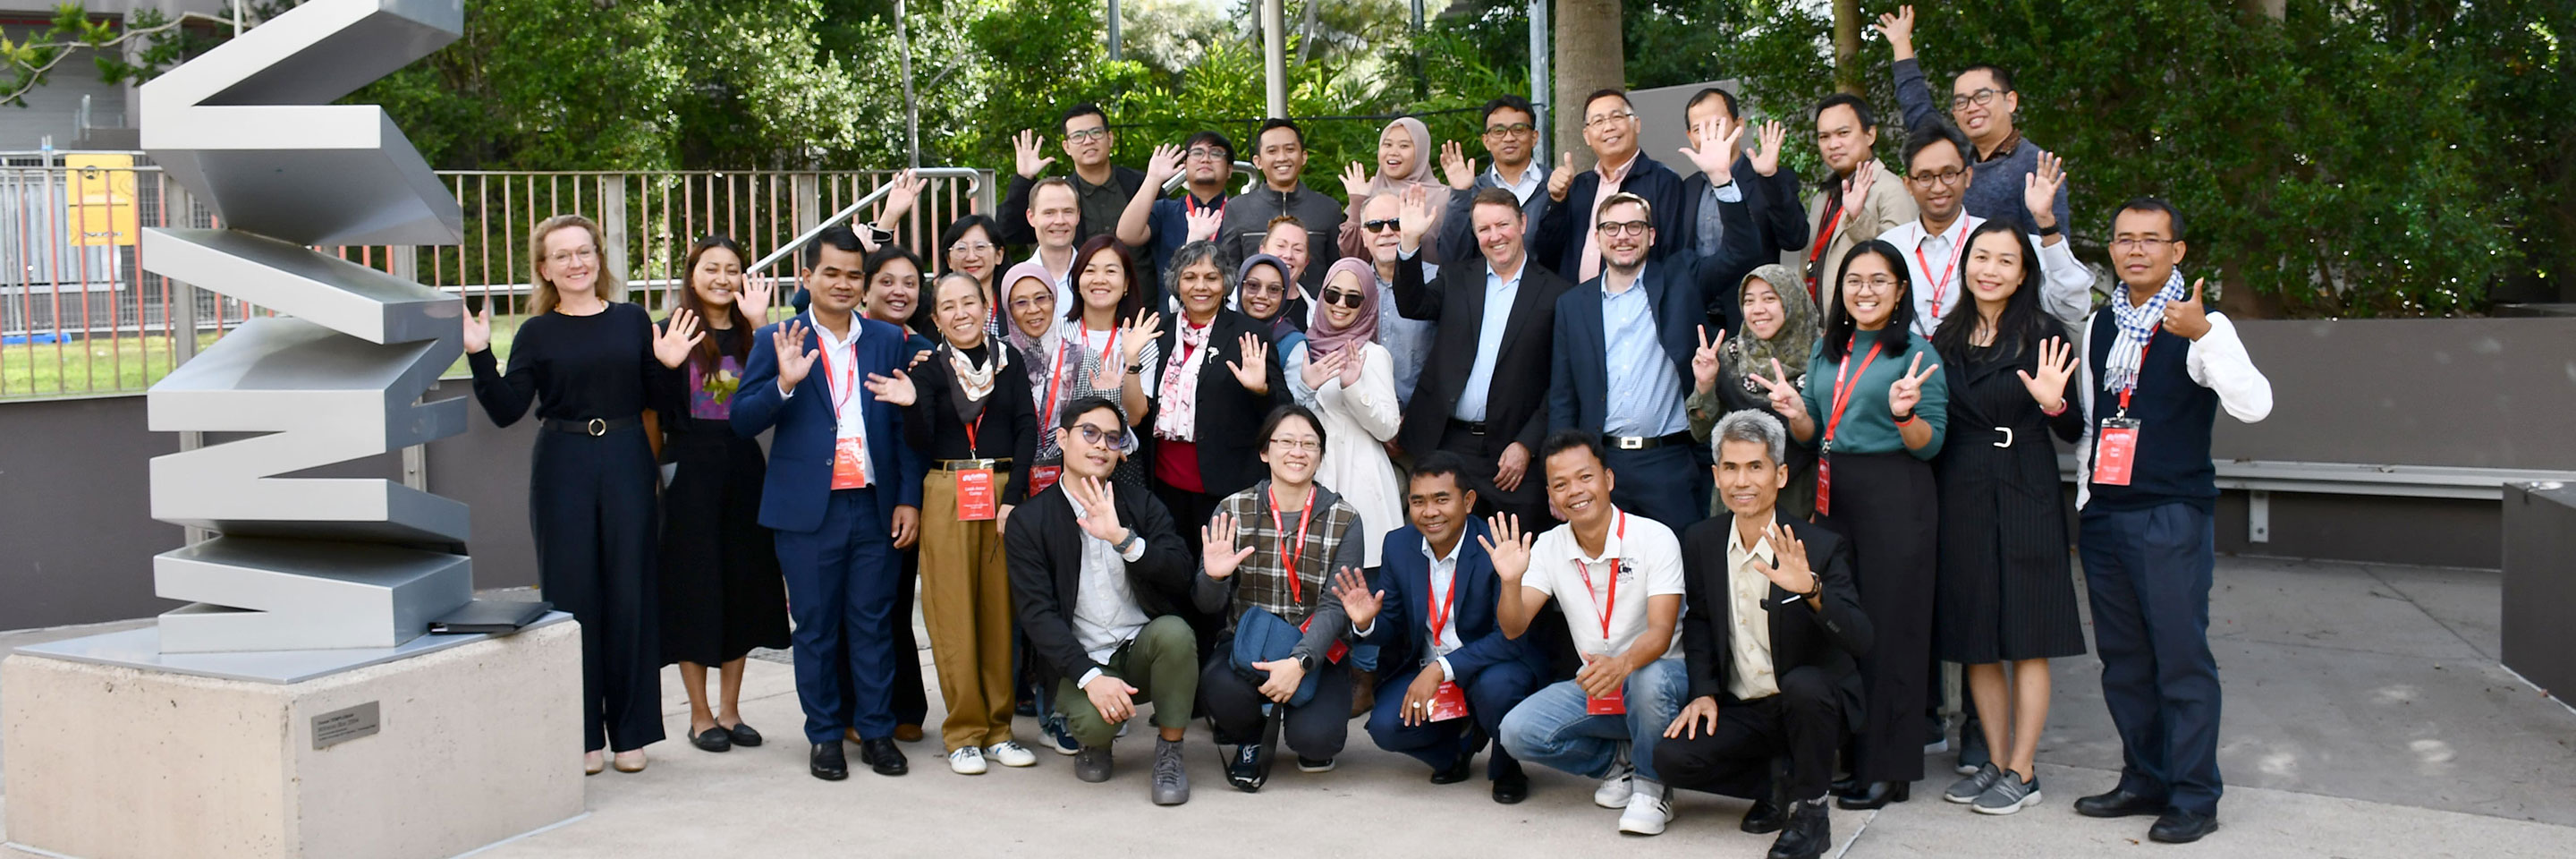 Recipients of the G20 “Recover Together, Recover Stronger” Scholarships meet with the President of Indonesia and the Prime Minister of Australia during the G20 Summit in Bali. These scholars will pursue postgraduate studies at Australian universities in a